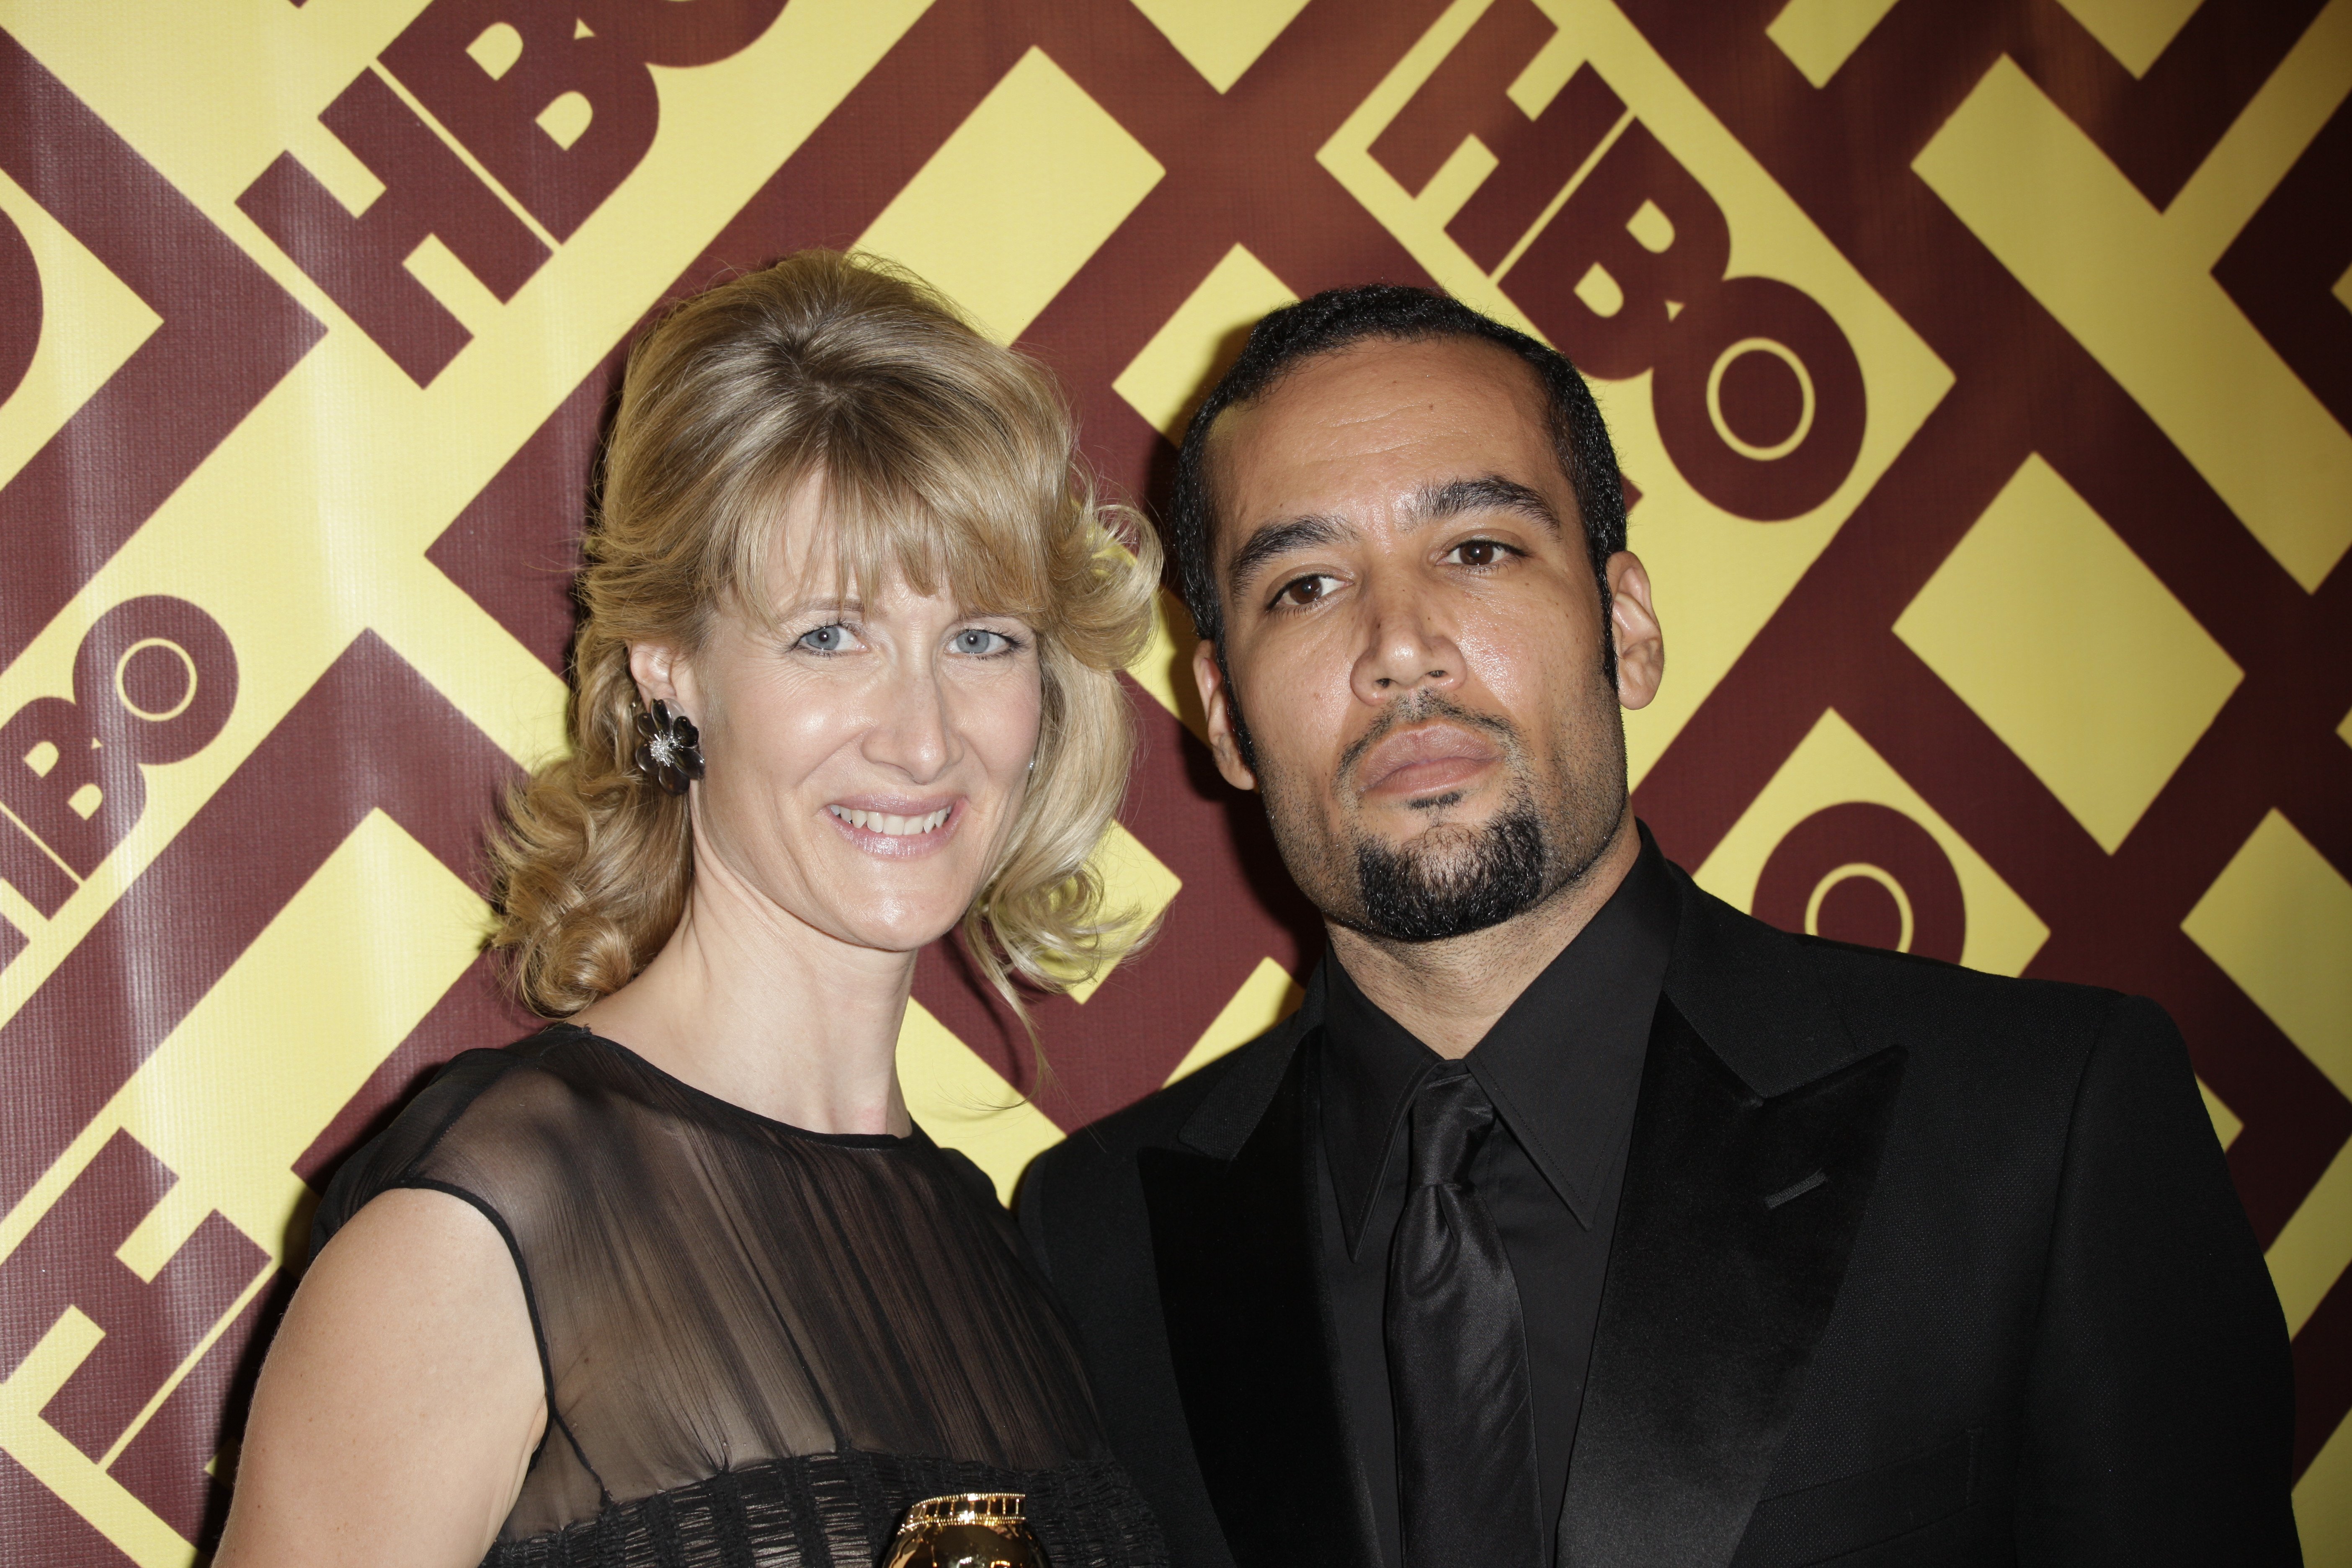 Laura Dern and Ben Harper arrive at the HBO after party for the 66th annual Golden Globe Awards held at Circa 55 Restaurant. | Source: Getty Images